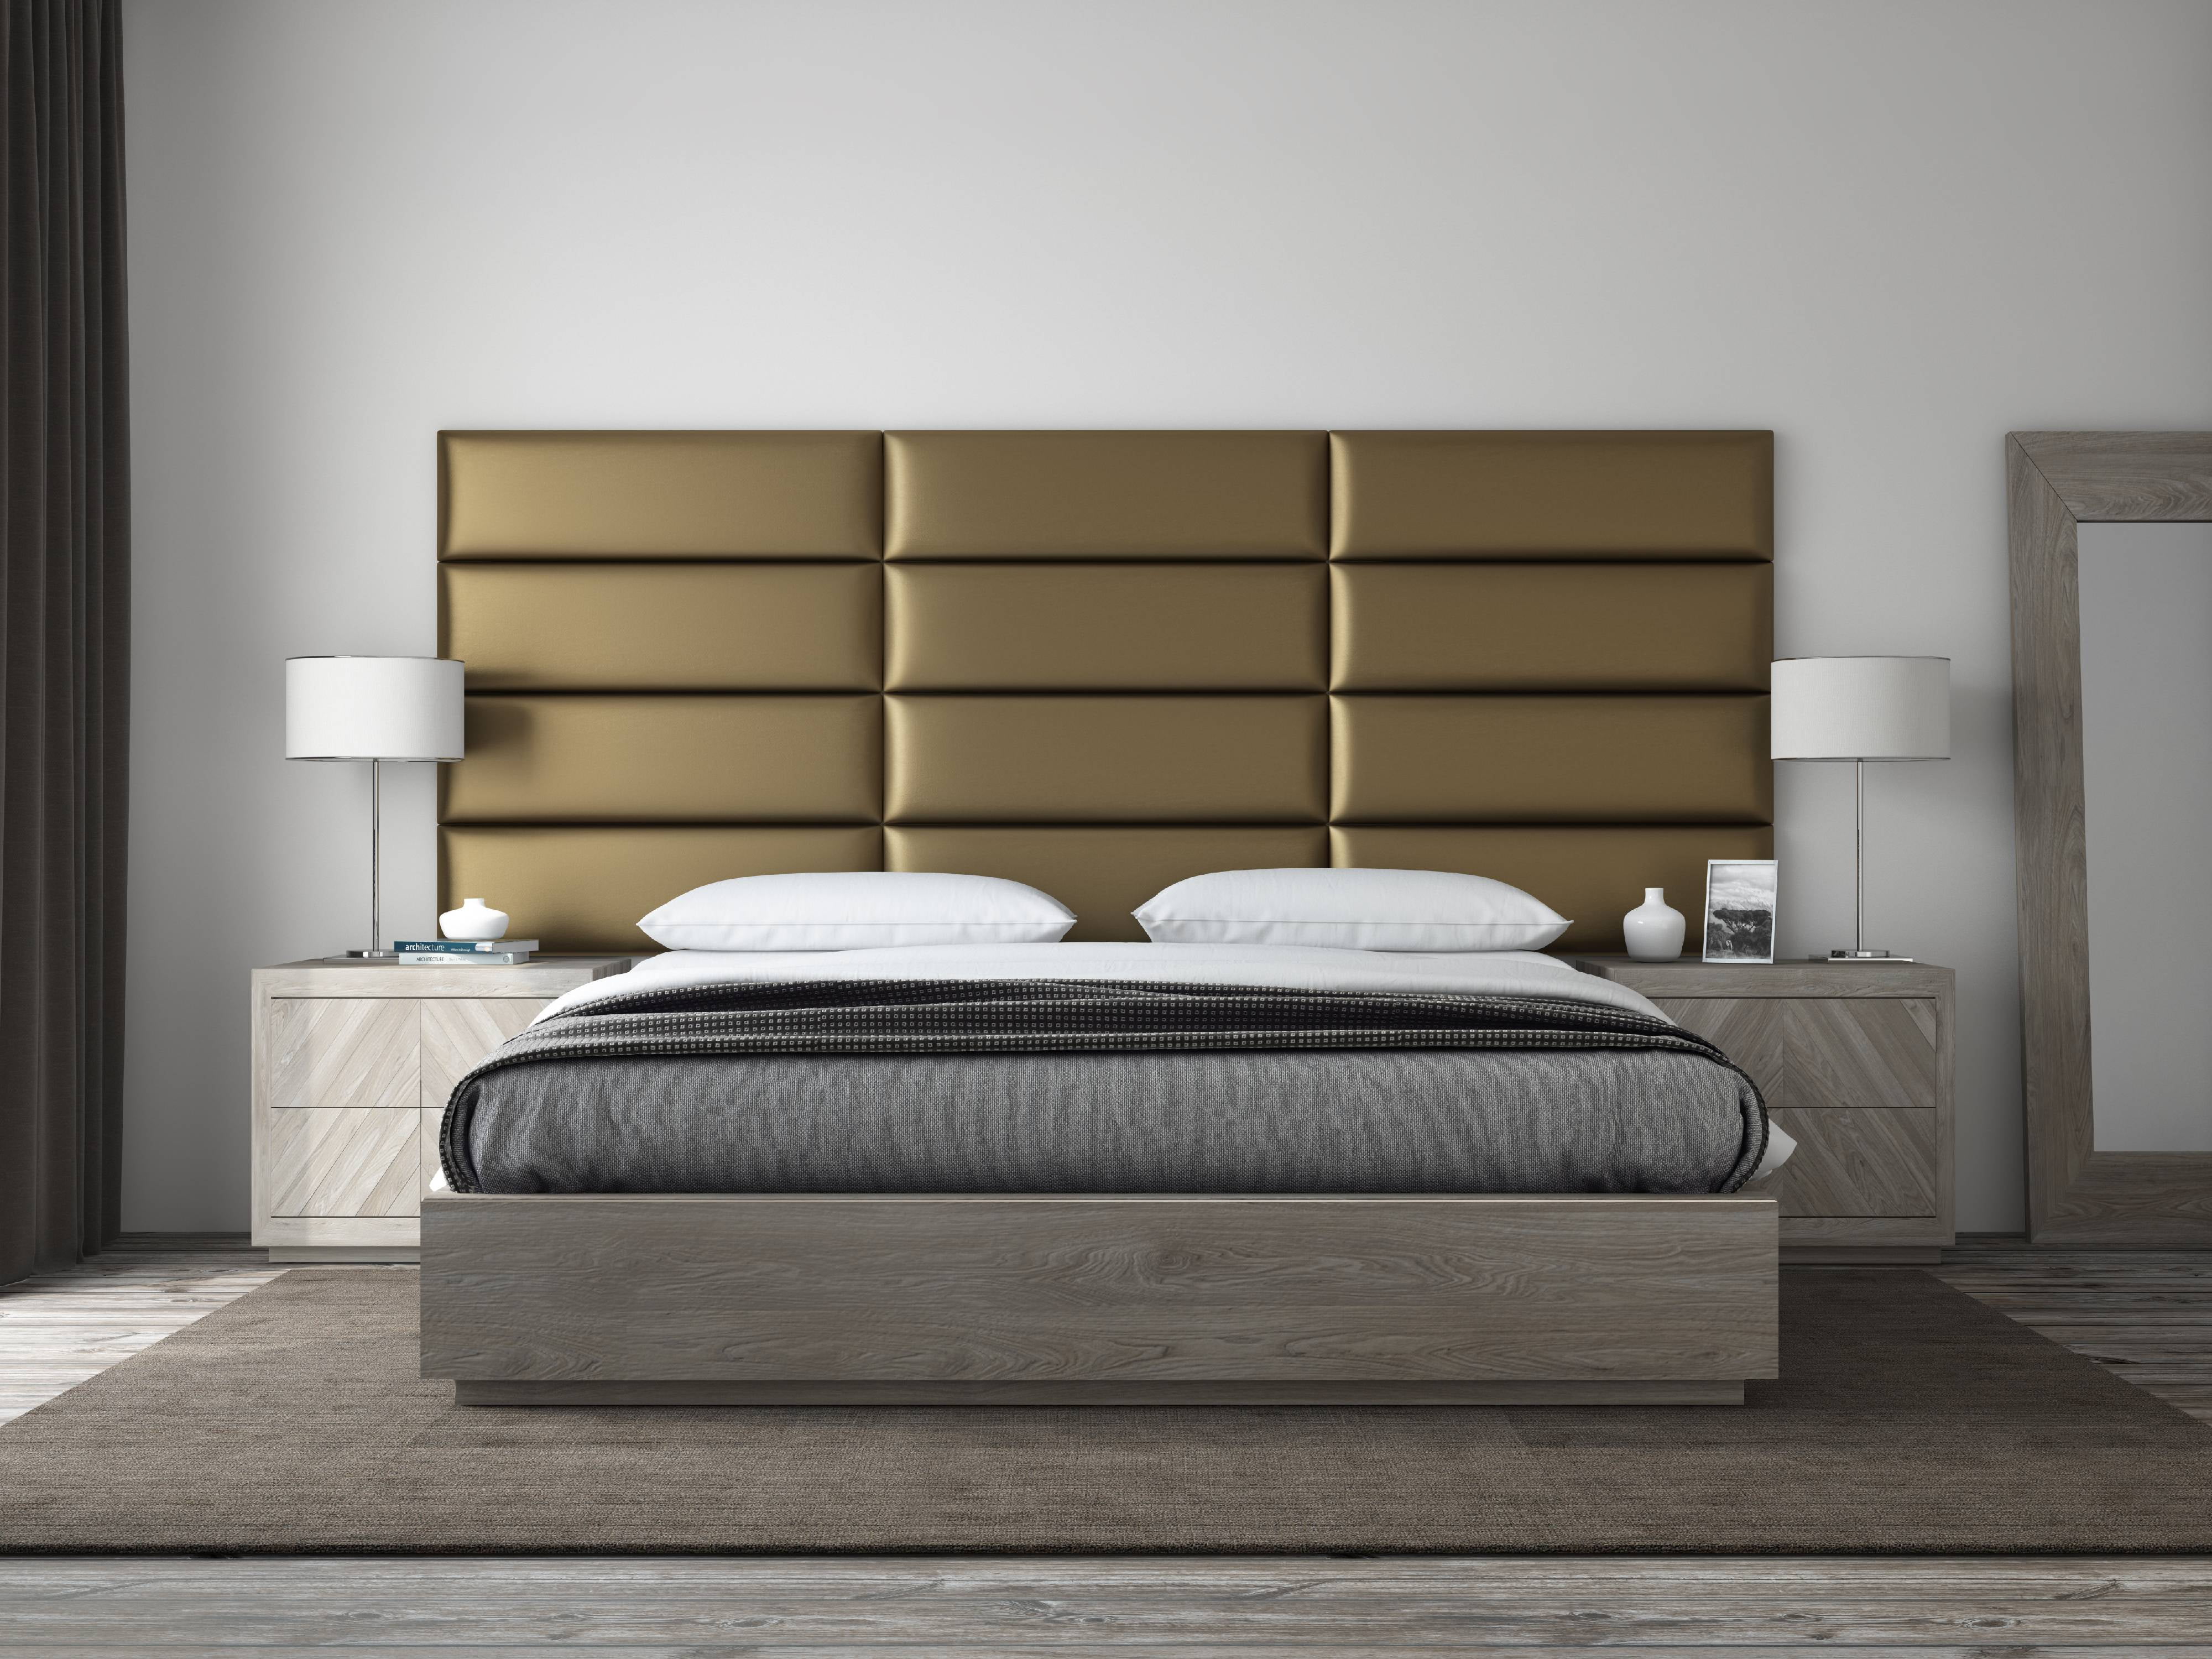 VANT Upholstered Headboards - Accent Wall Panels - Packs Of 4